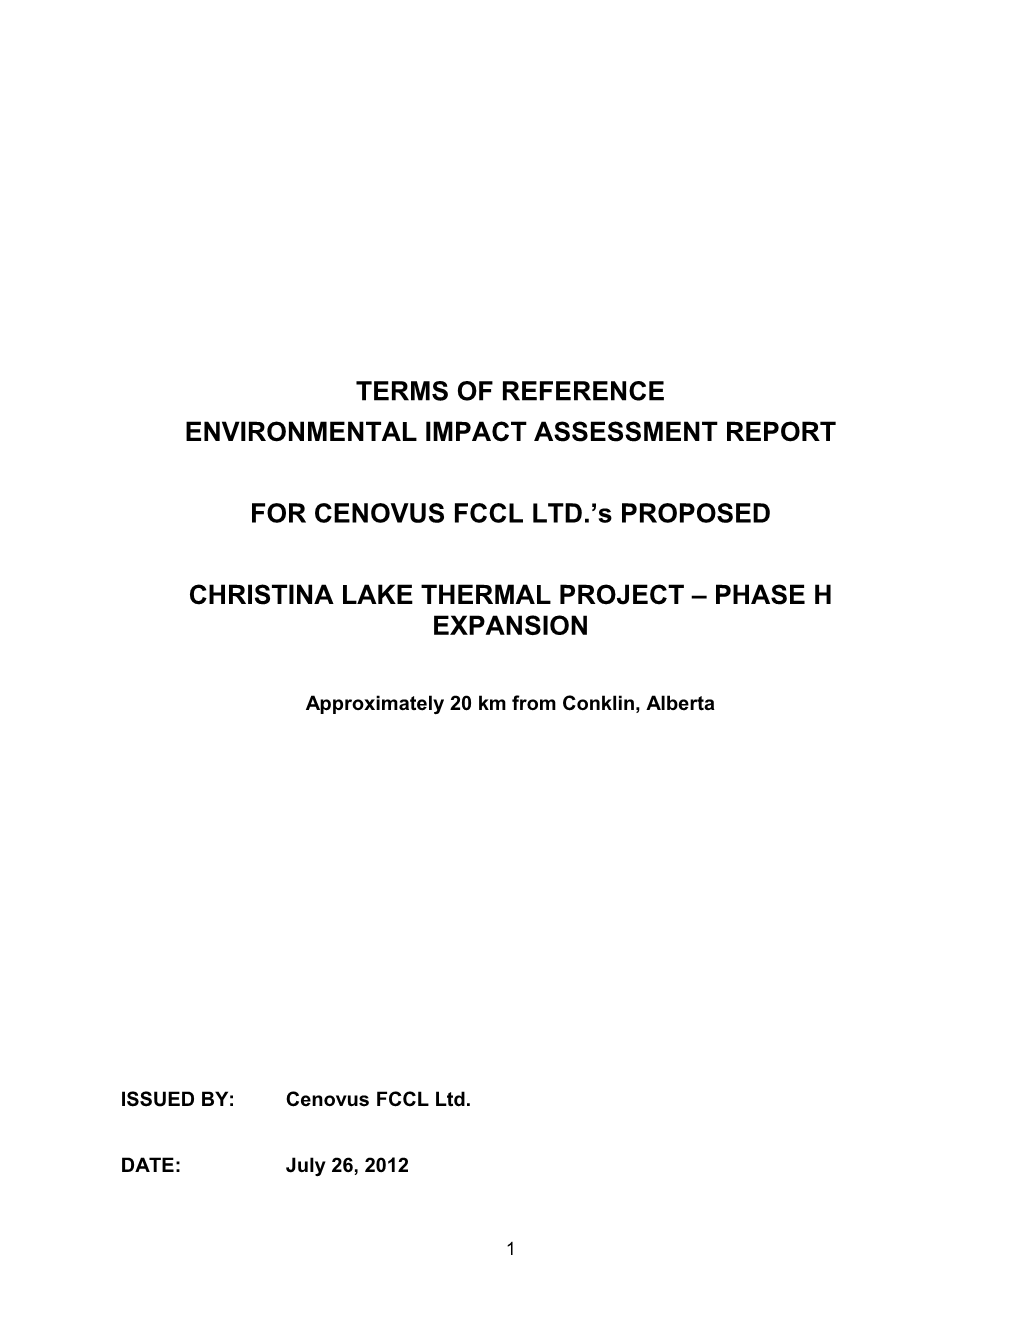 Terms of Reference Environmental Impact Assessment Report - Christina Lake Thermal Project